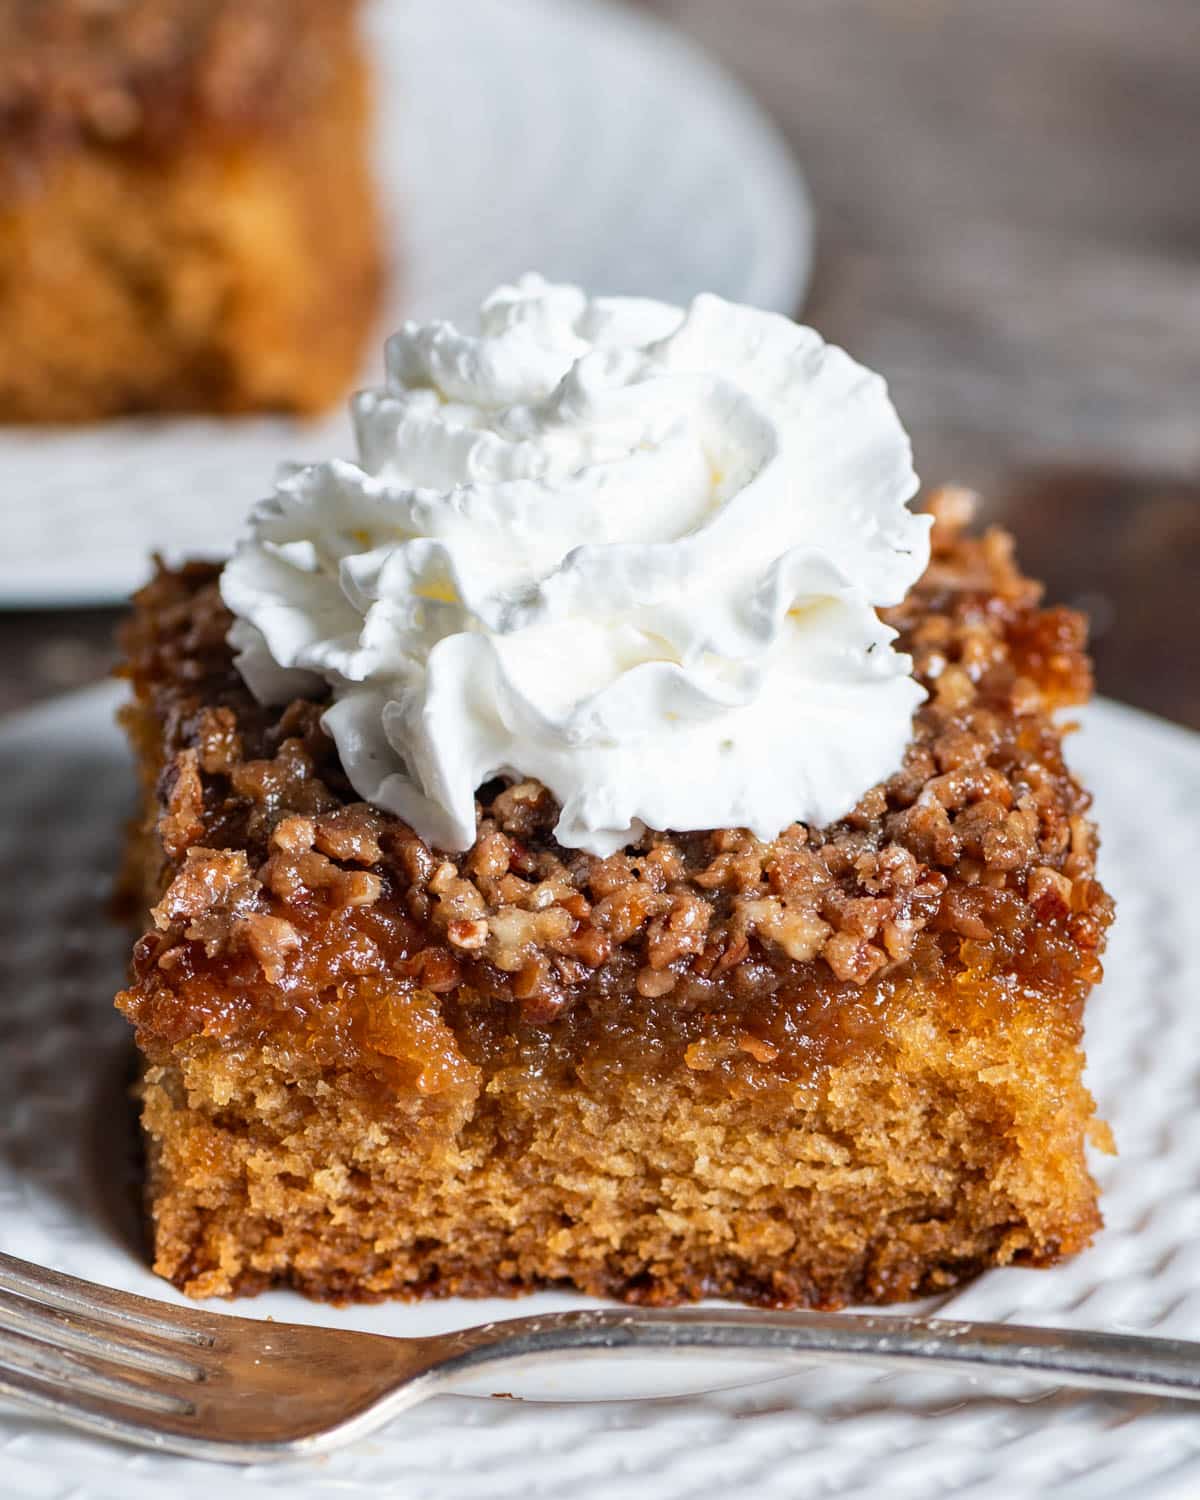 amish cake with whipped cream on top on a plate with a fork